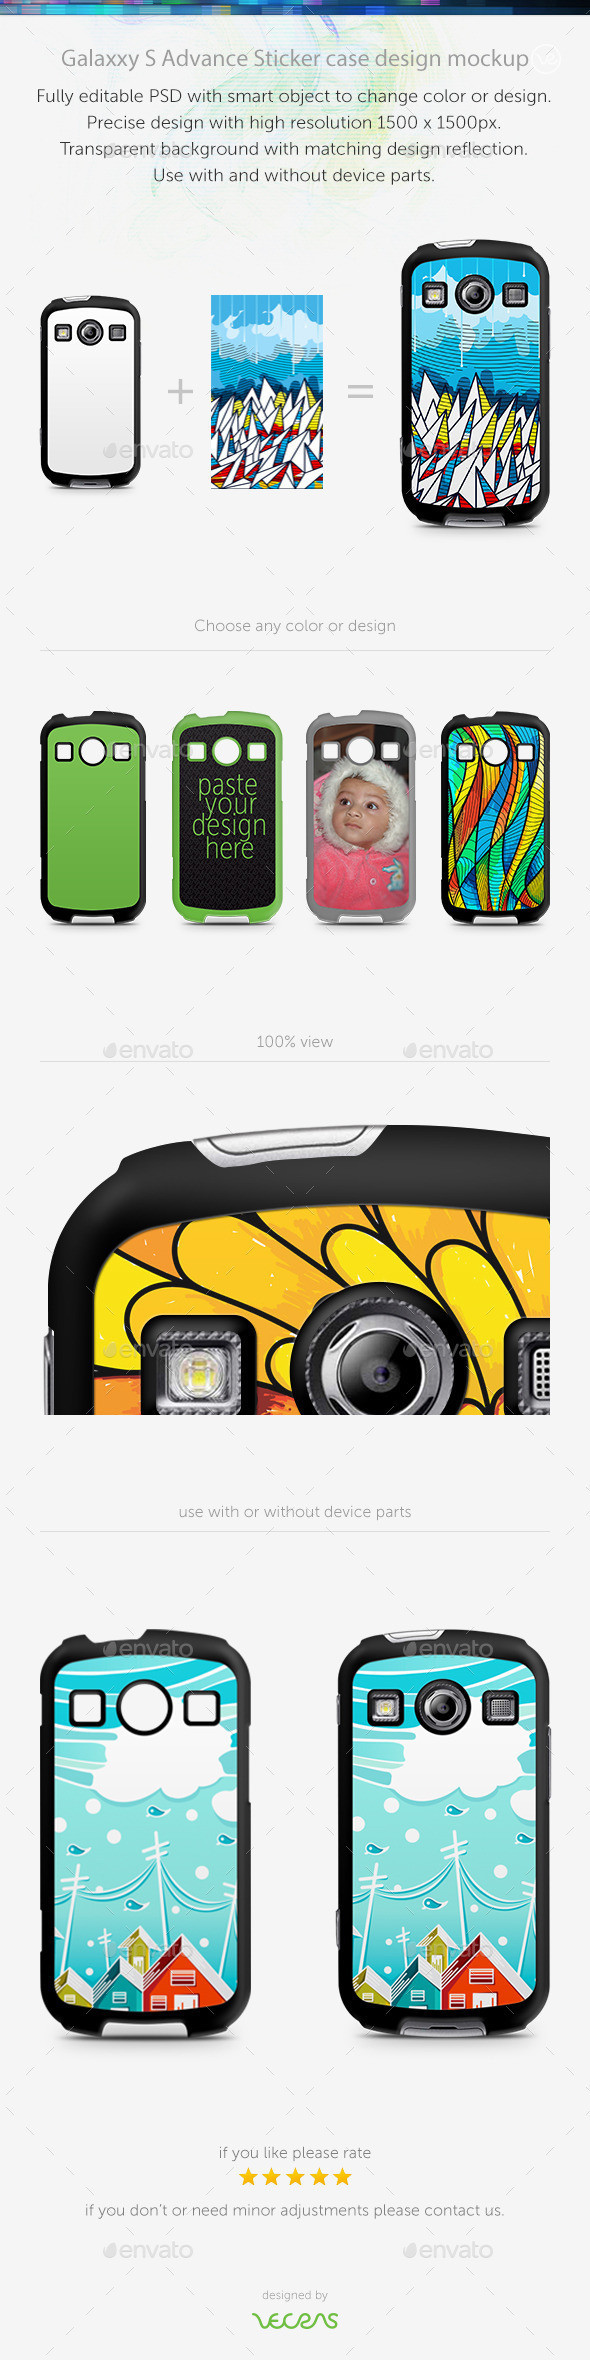 Preview galaxxy x cover 2 stickercase mockup back